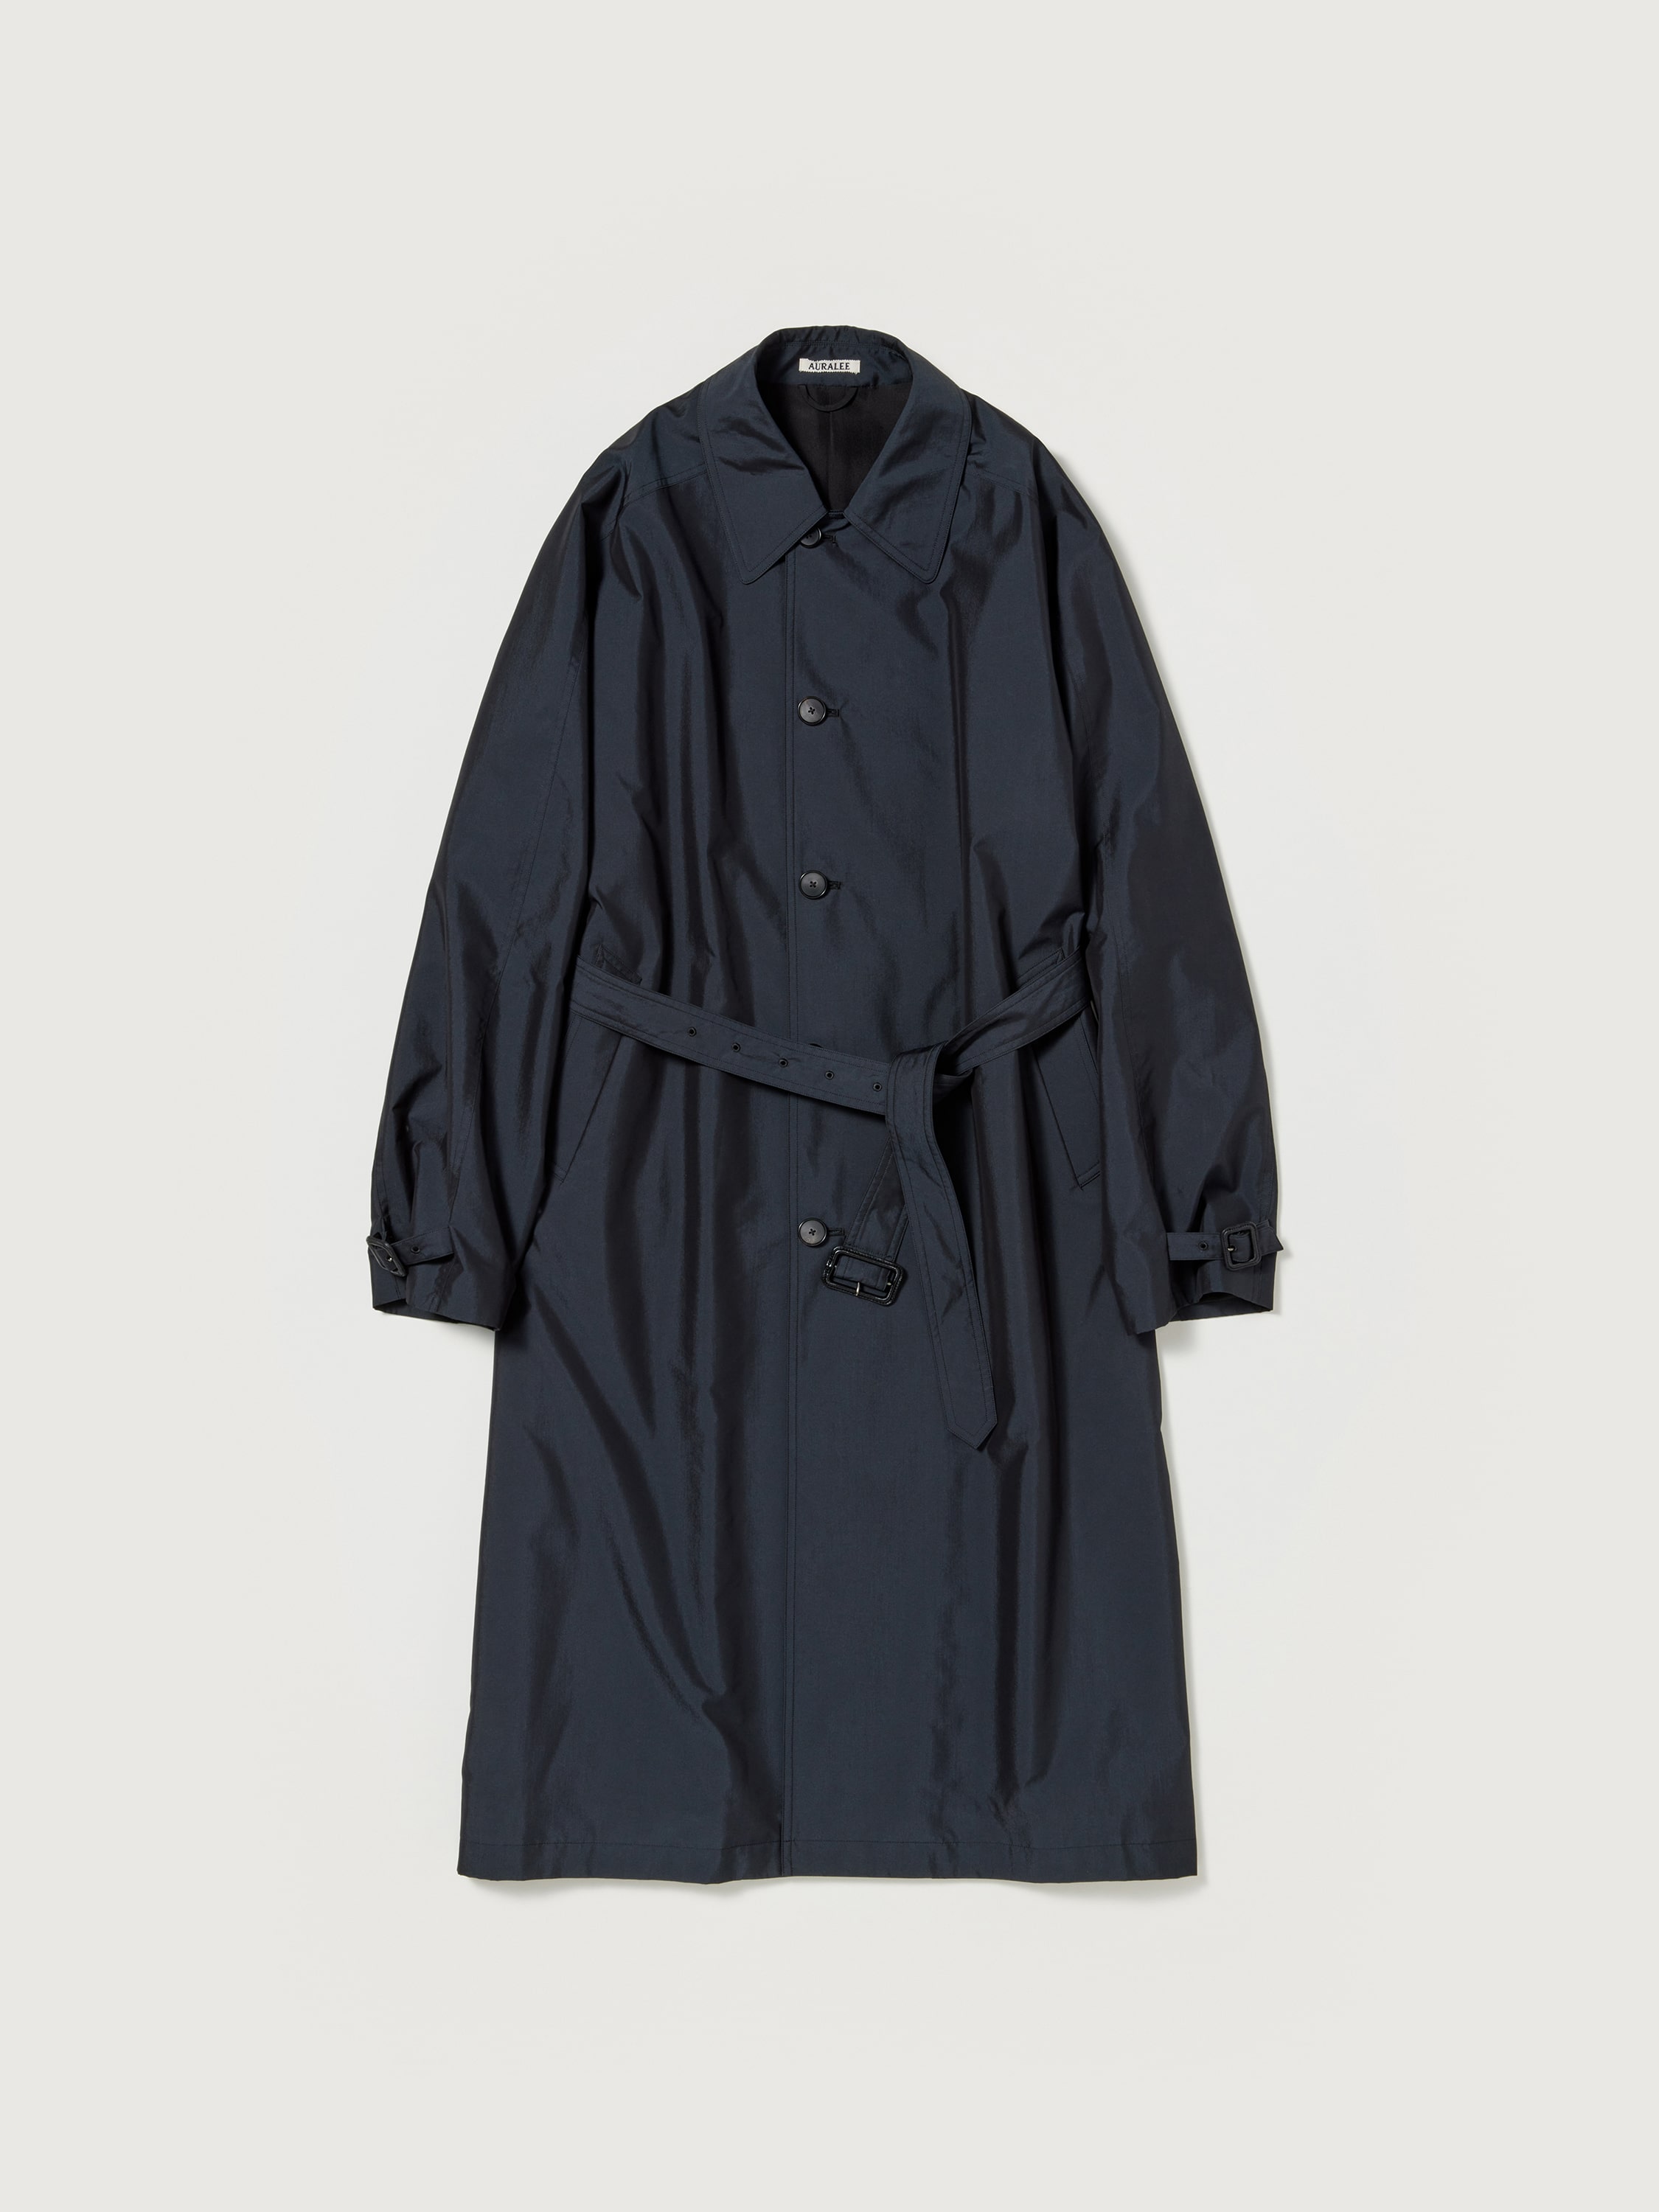 FINX POLYESTER WEATHER CHAMBRAY SOUTIEN COLLAR COAT 詳細画像 BLACK CHAMBRAY 8